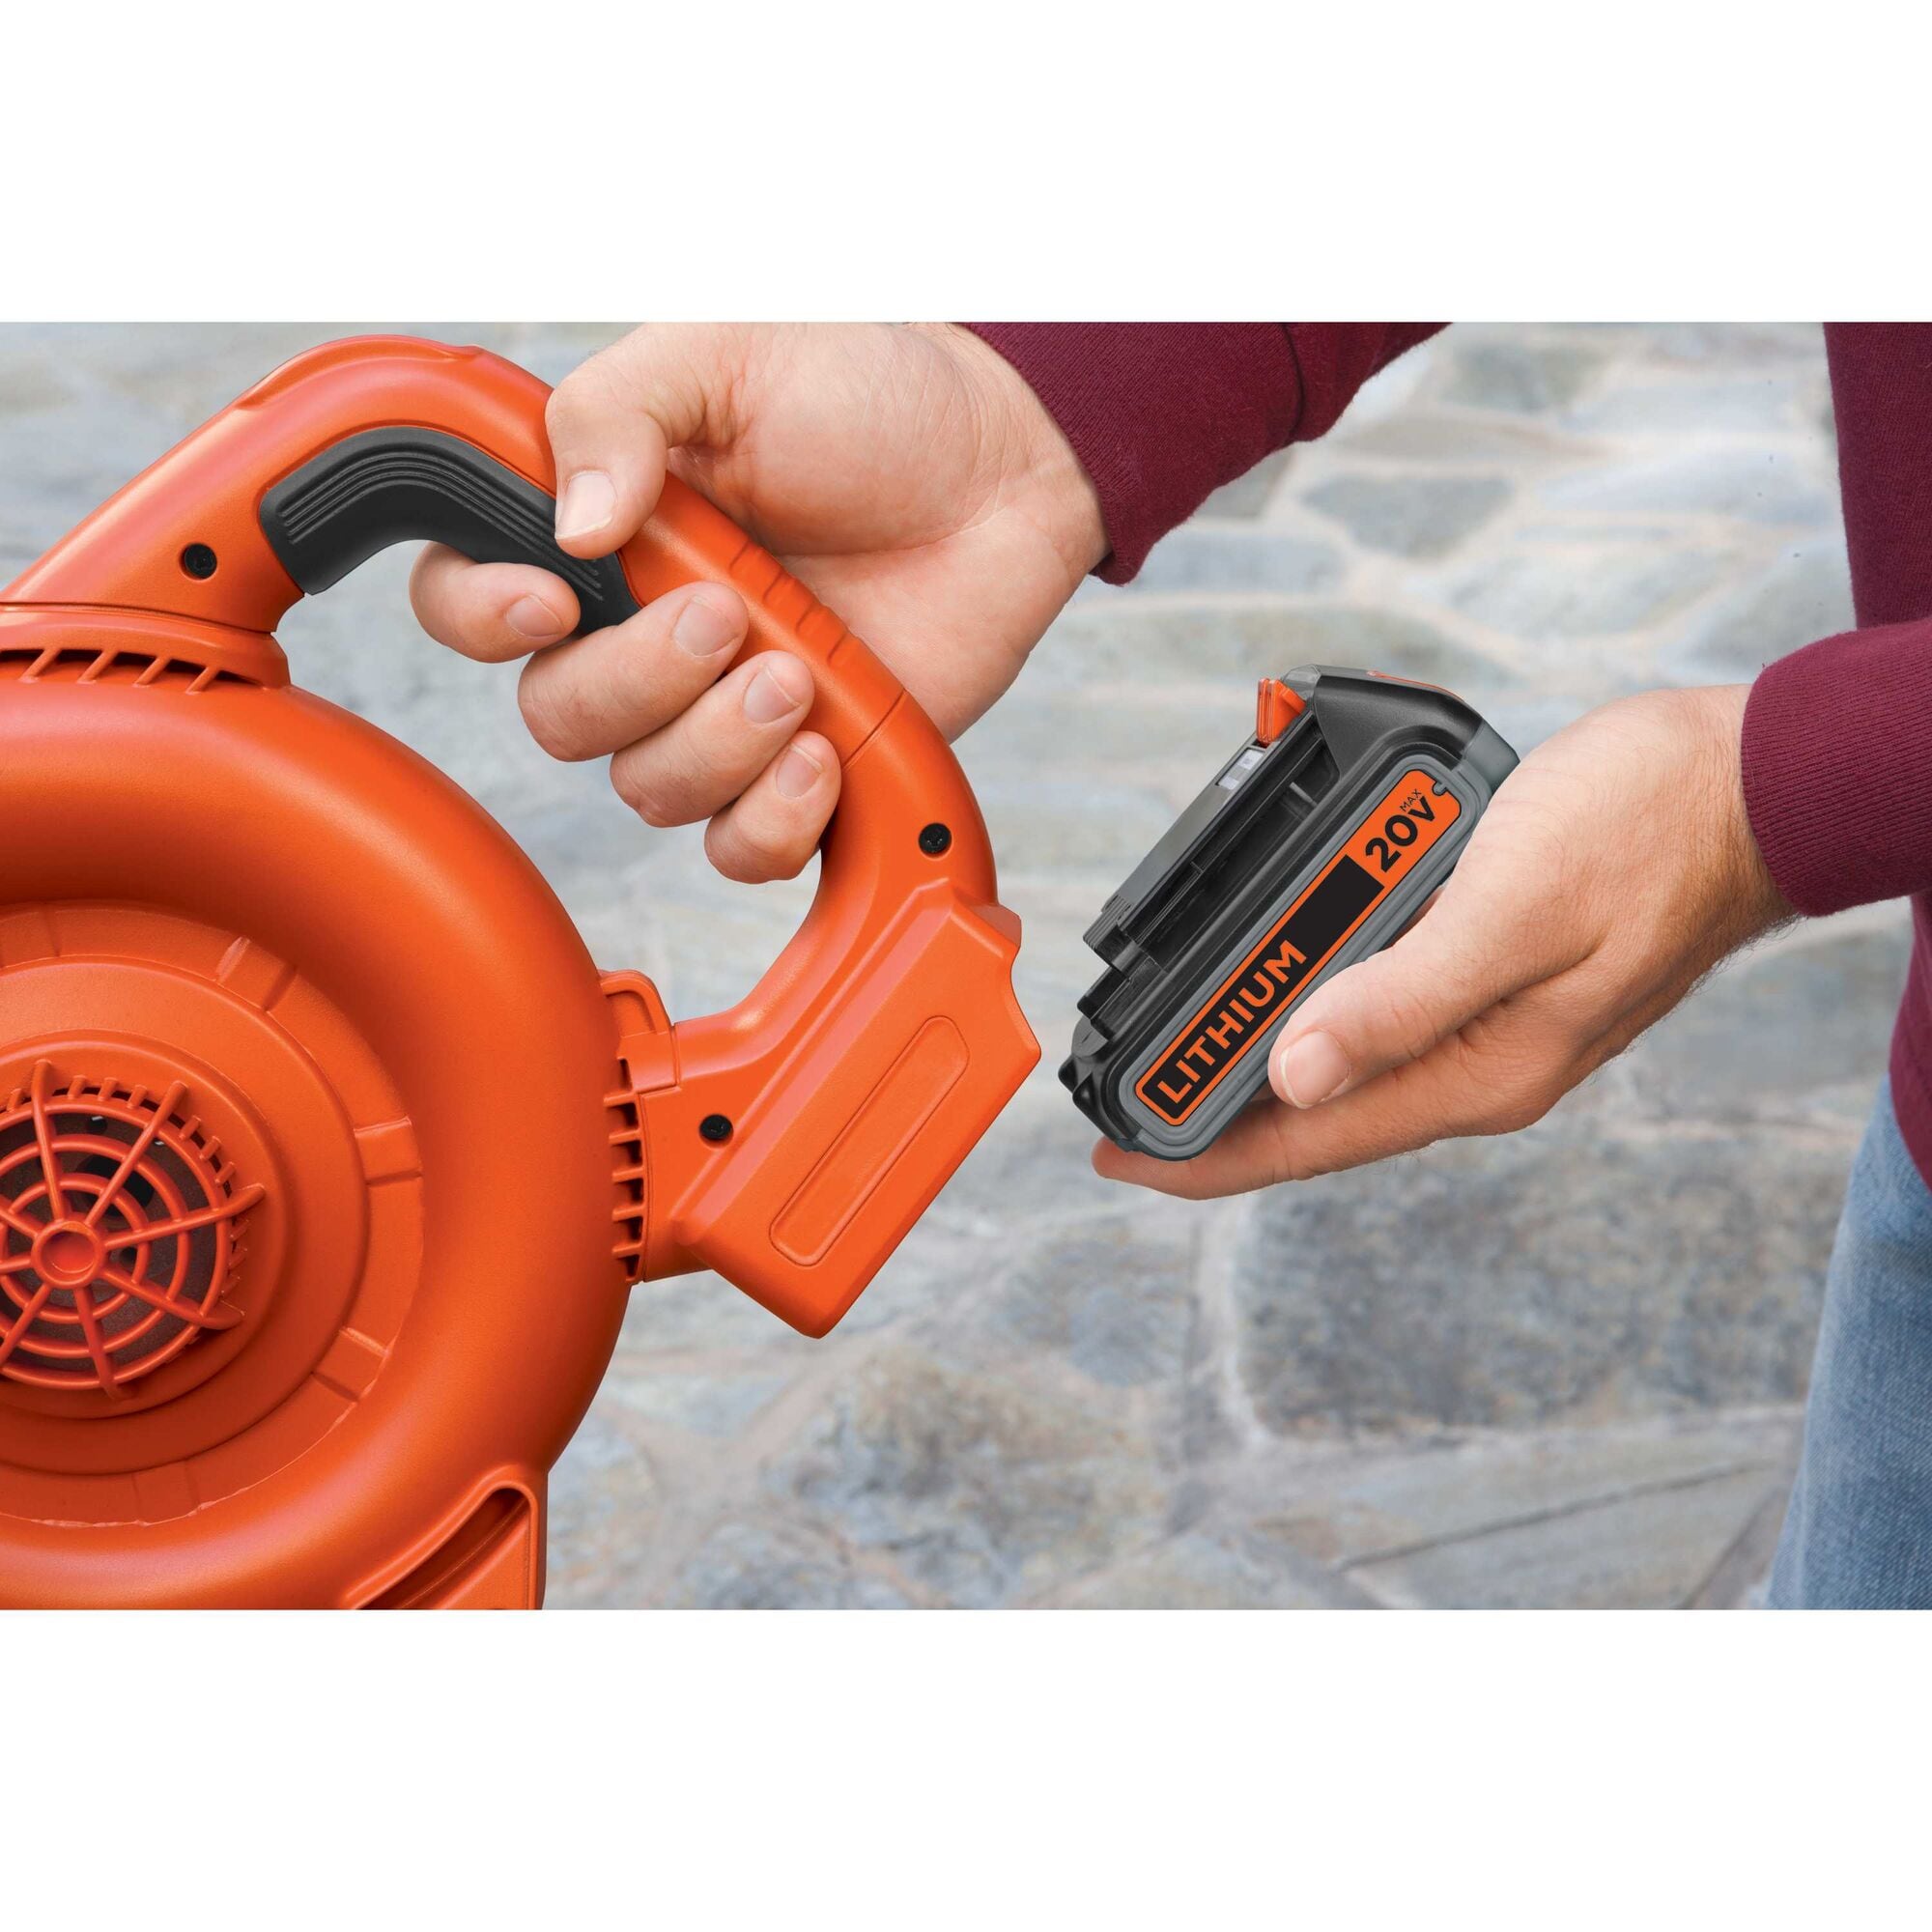 Black + Decker 20v Lithium Ion Battery for Sale in Siler City, NC